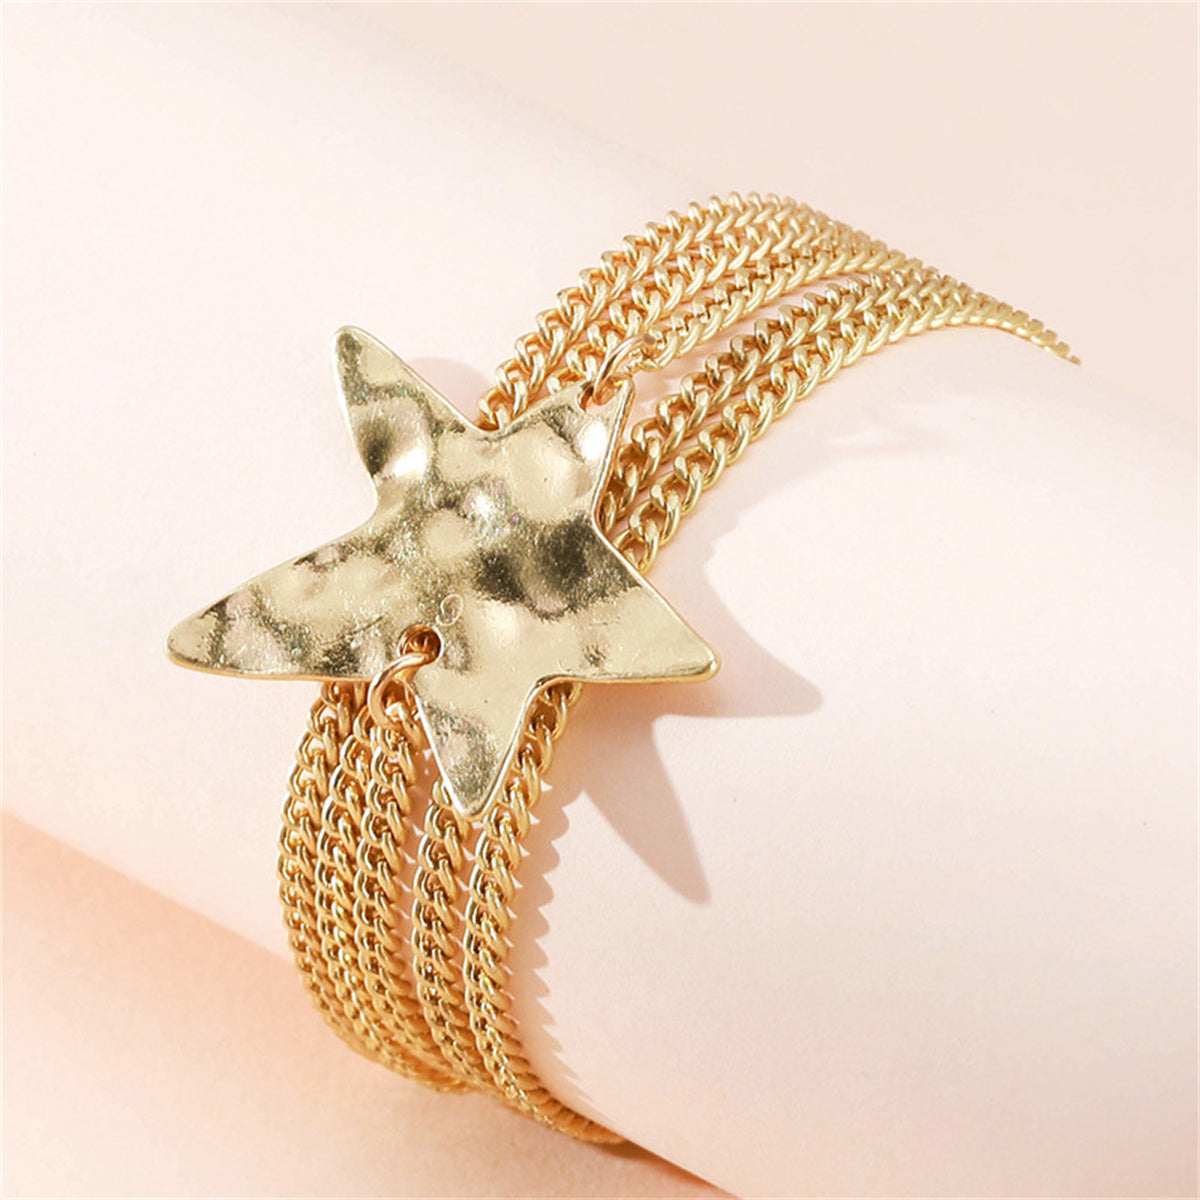 18K Gold-Plated Curb Chain Star Layered Bracelet